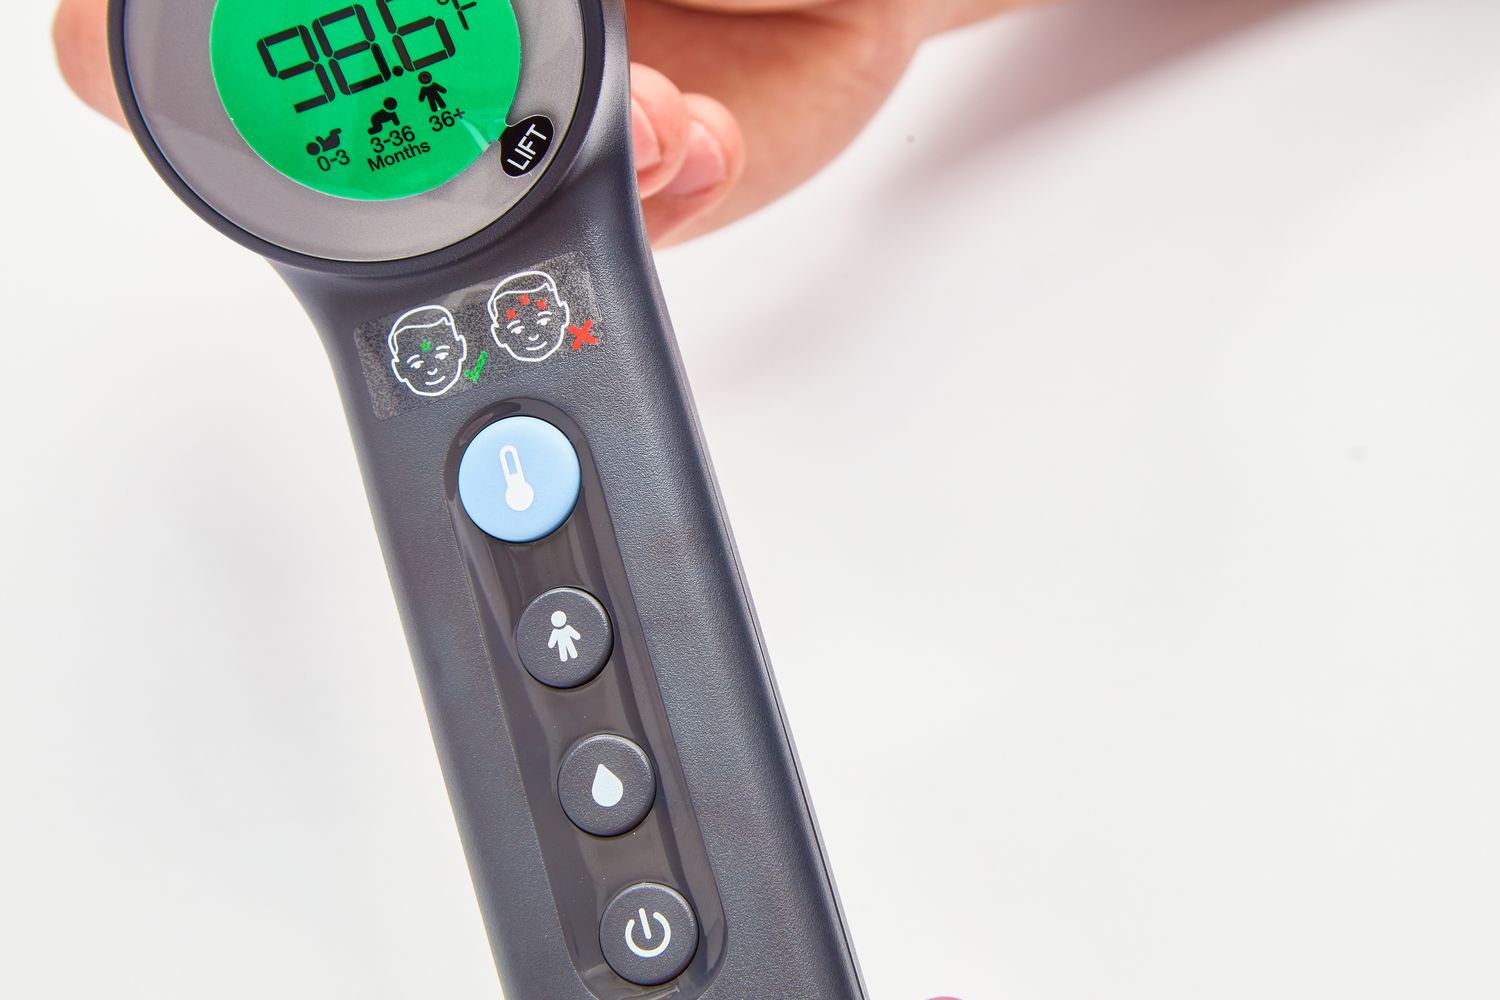 Braun No Touch 3-in-1 Thermometer